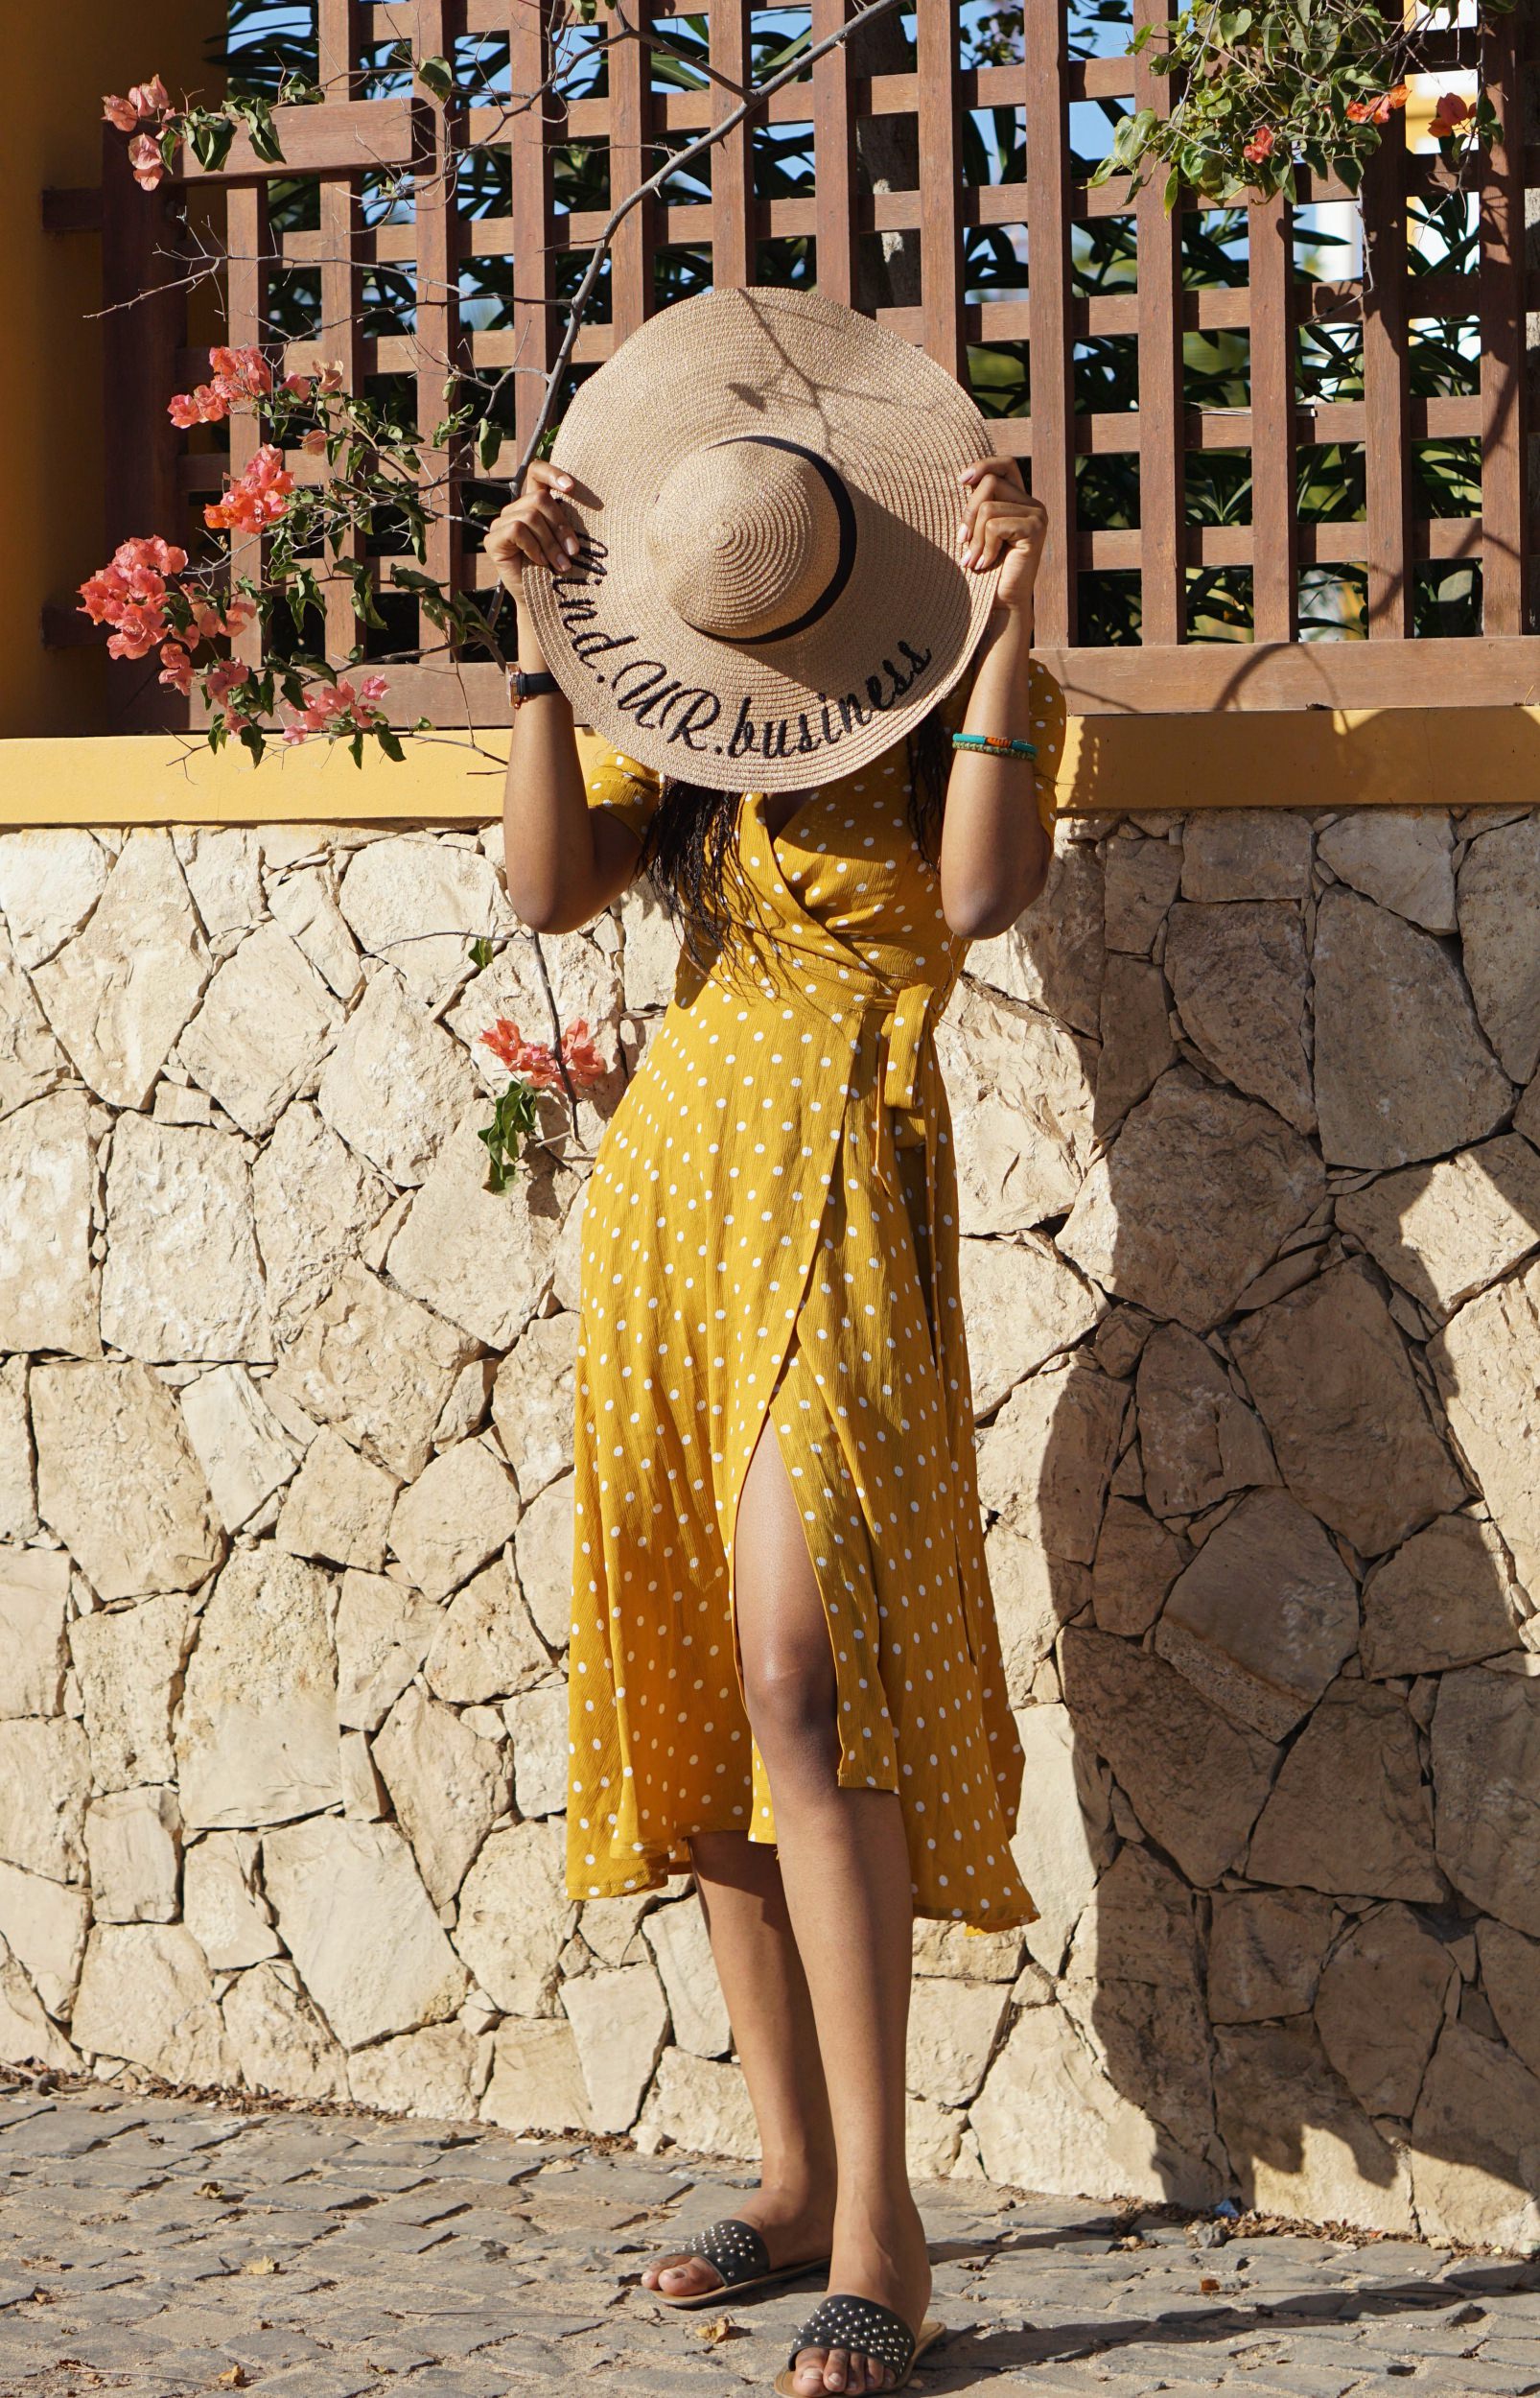 Cassie Daves wearing a yellow polka dot dress and holding a straw hat